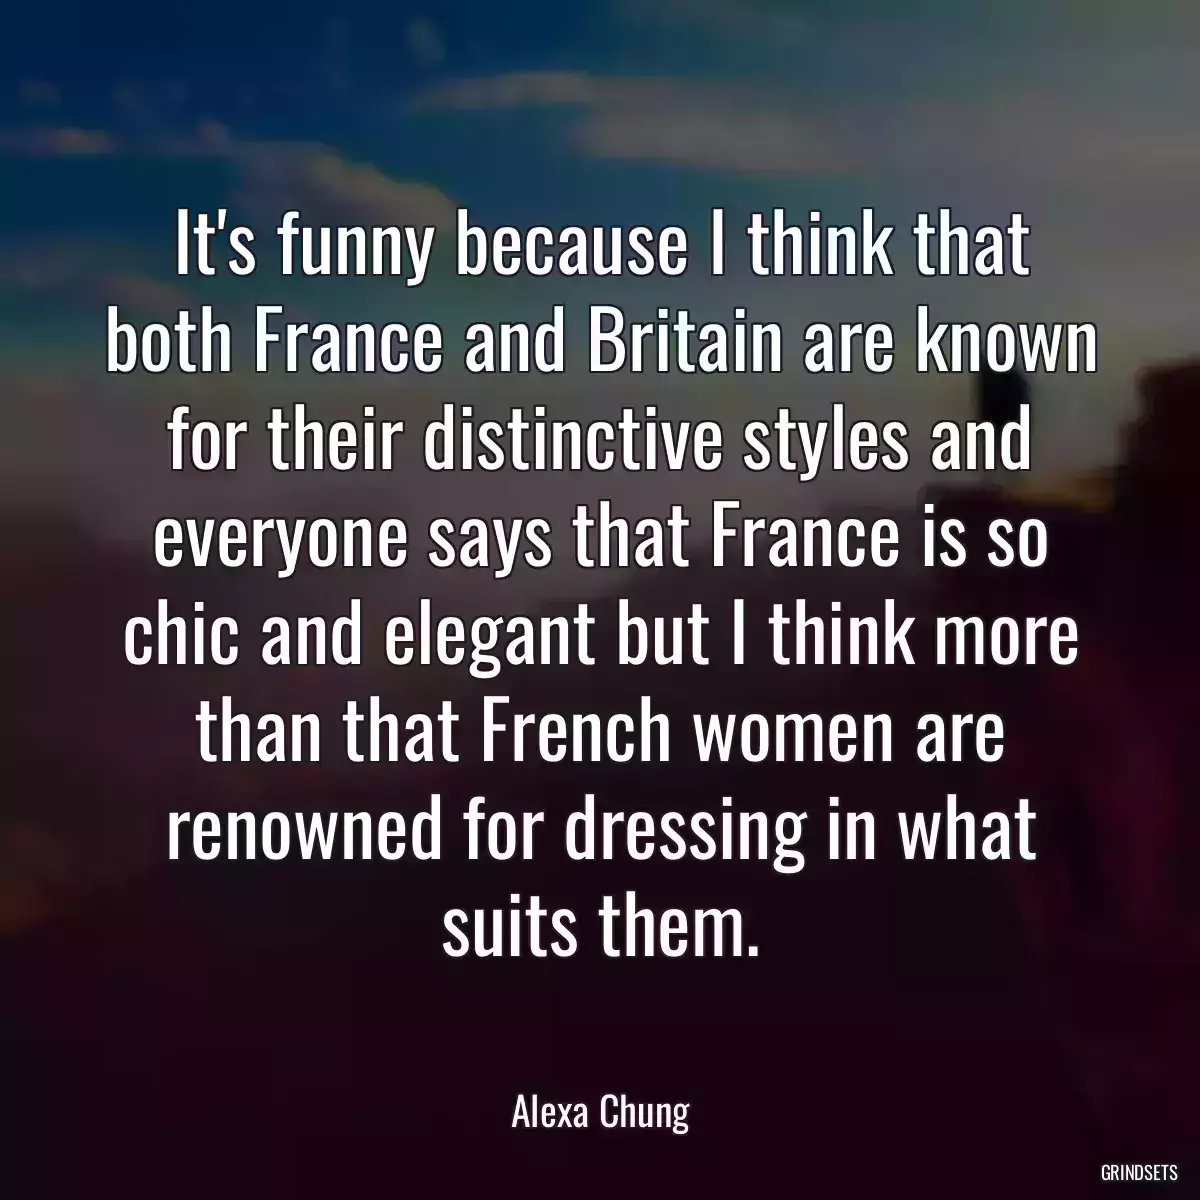 It\'s funny because I think that both France and Britain are known for their distinctive styles and everyone says that France is so chic and elegant but I think more than that French women are renowned for dressing in what suits them.